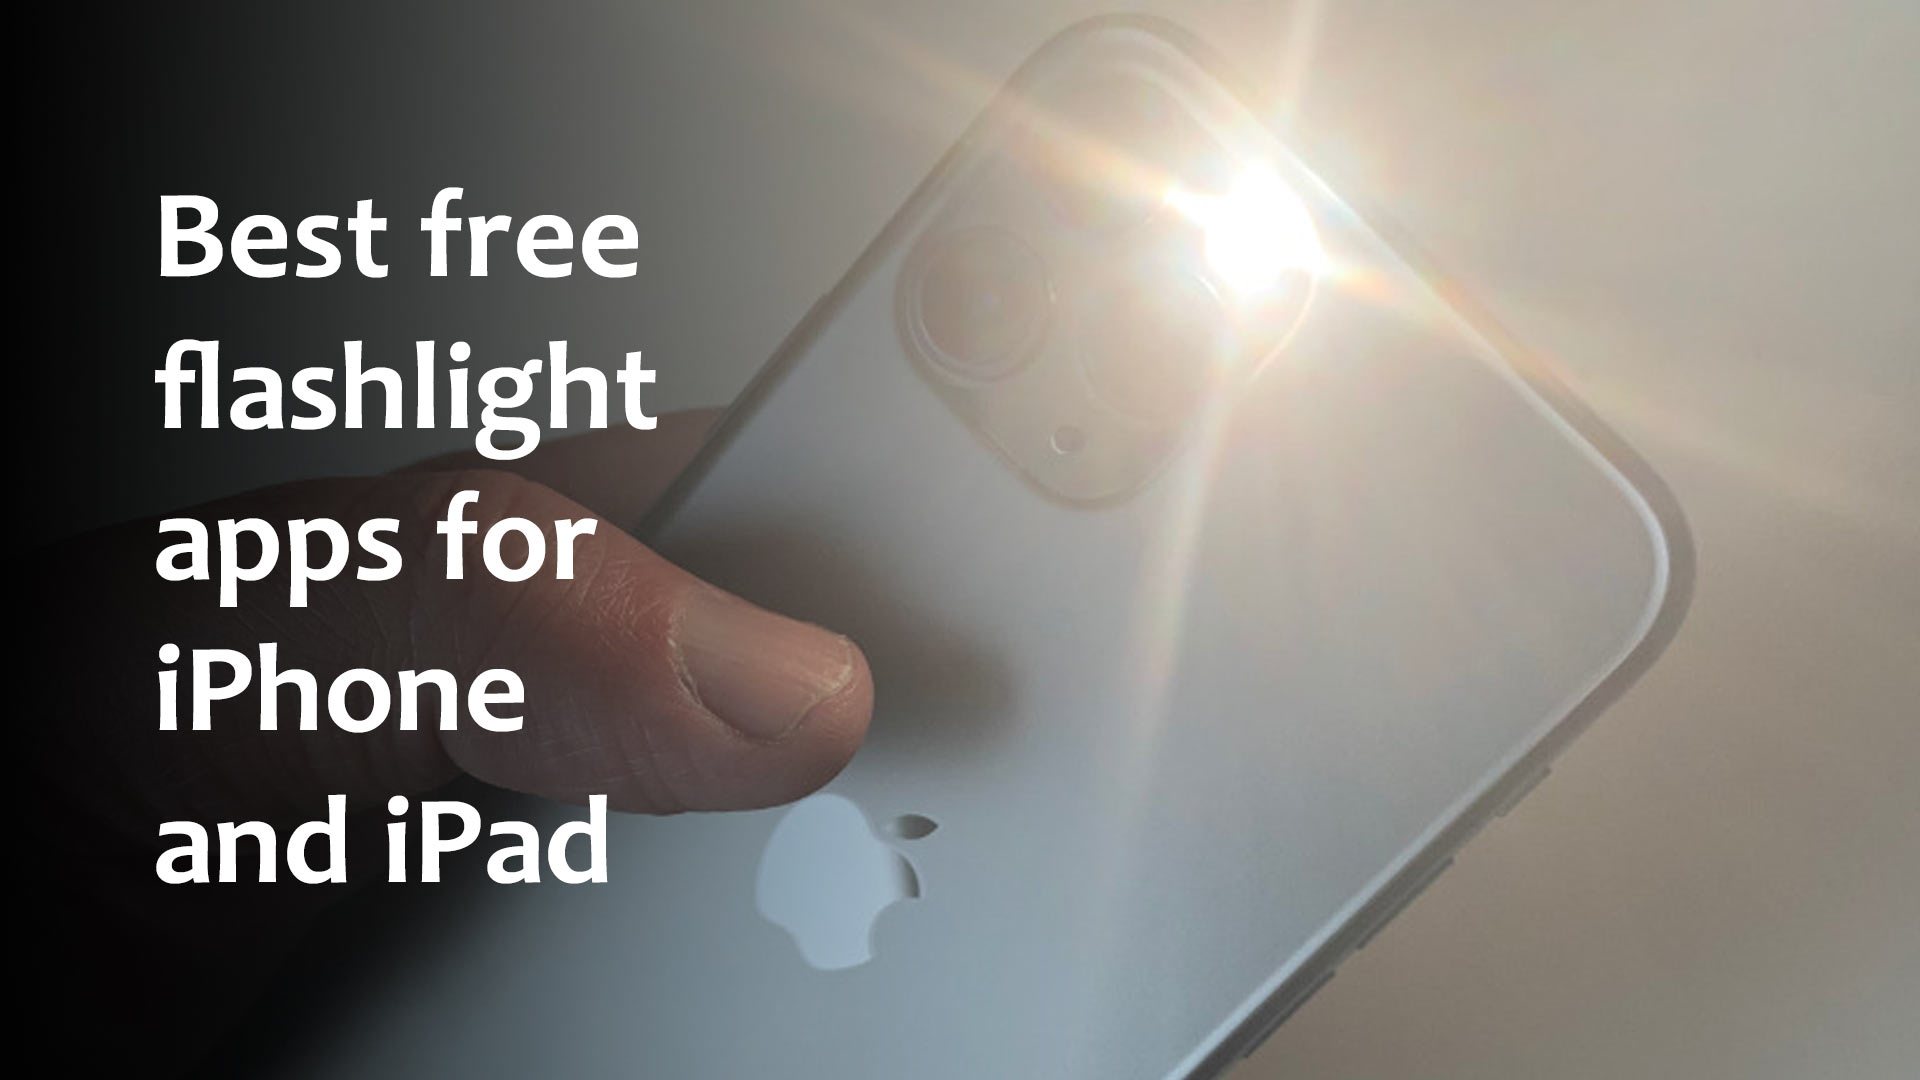 Best free flashlight apps for iPhone and iPad